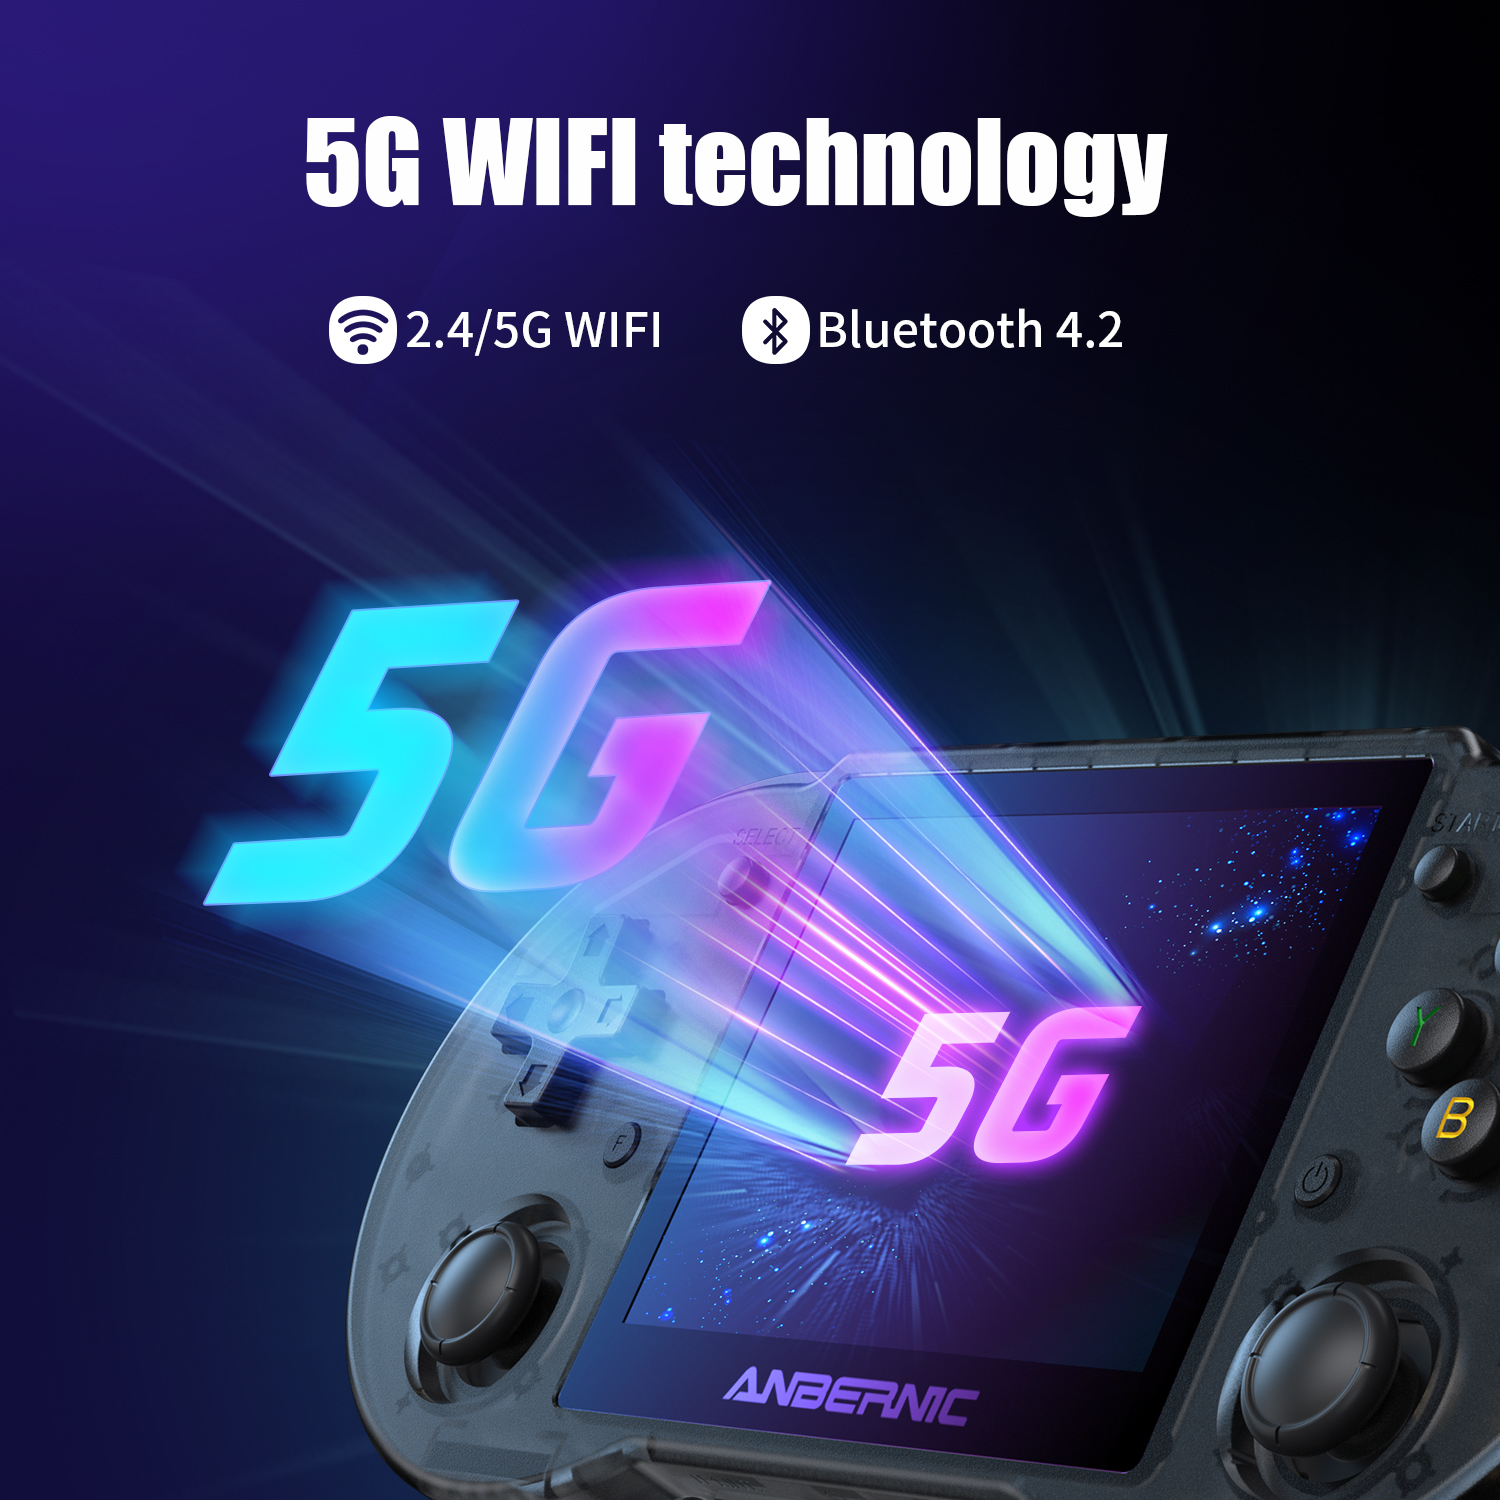 ANBERNIC RG353P 80GB 15000 Games Video Handheld Game Console Android 11 Linux Dual System 5G WiFi Bluetooth 4.2 DC SS PS1 NDS N64 Retro Game Player 3.5 inch IPS Full View Display HDMI Output